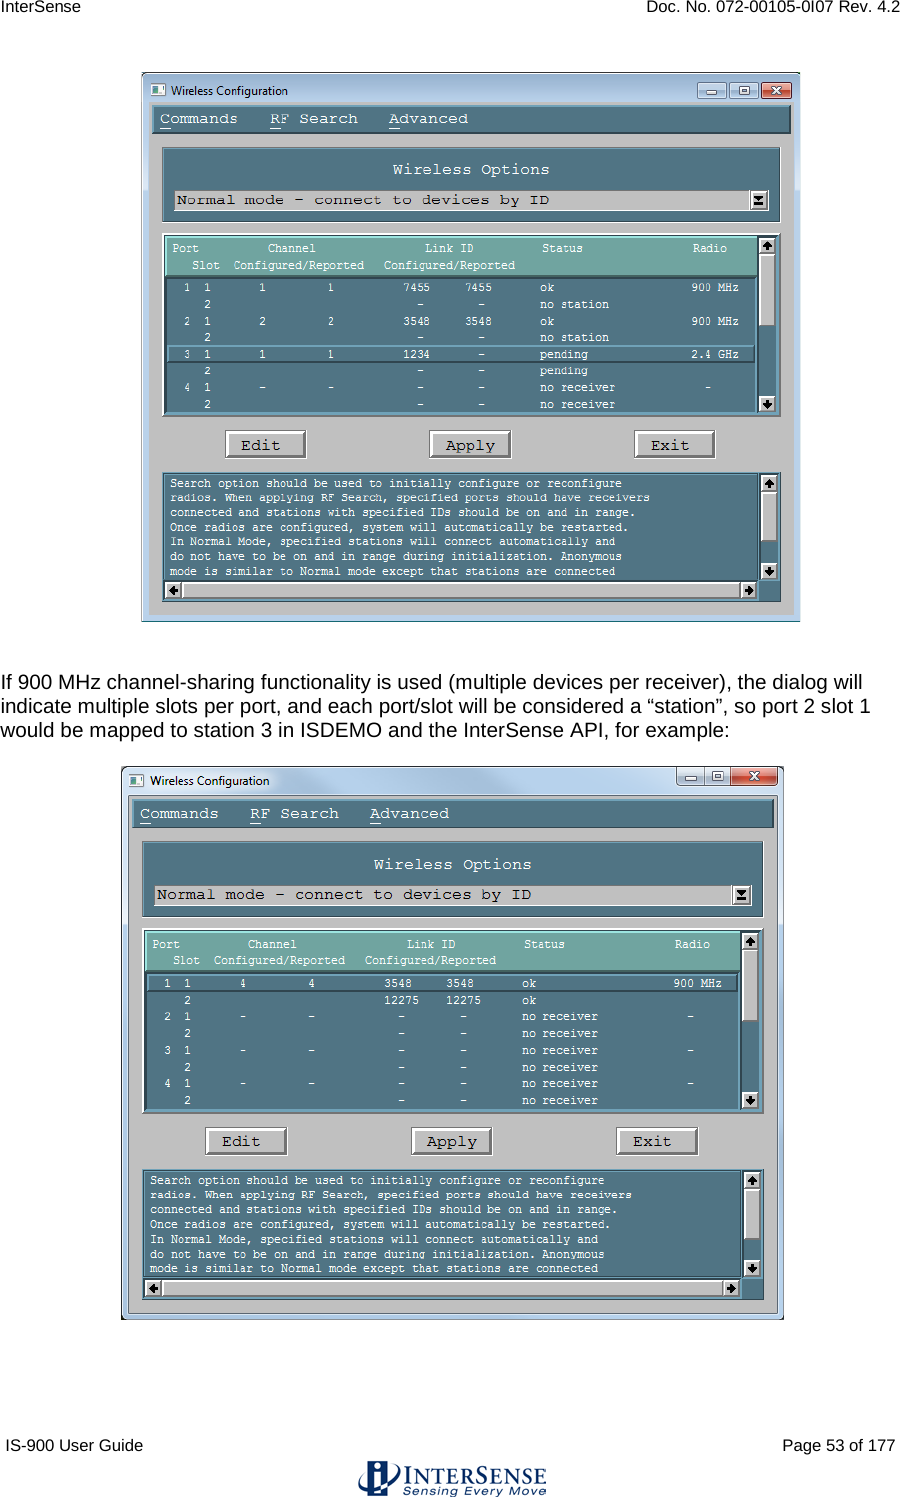 InterSense    Doc. No. 072-00105-0I07 Rev. 4.2 IS-900 User Guide                                                                                                                                          Page 53 of 177    If 900 MHz channel-sharing functionality is used (multiple devices per receiver), the dialog will indicate multiple slots per port, and each port/slot will be considered a “station”, so port 2 slot 1 would be mapped to station 3 in ISDEMO and the InterSense API, for example:      